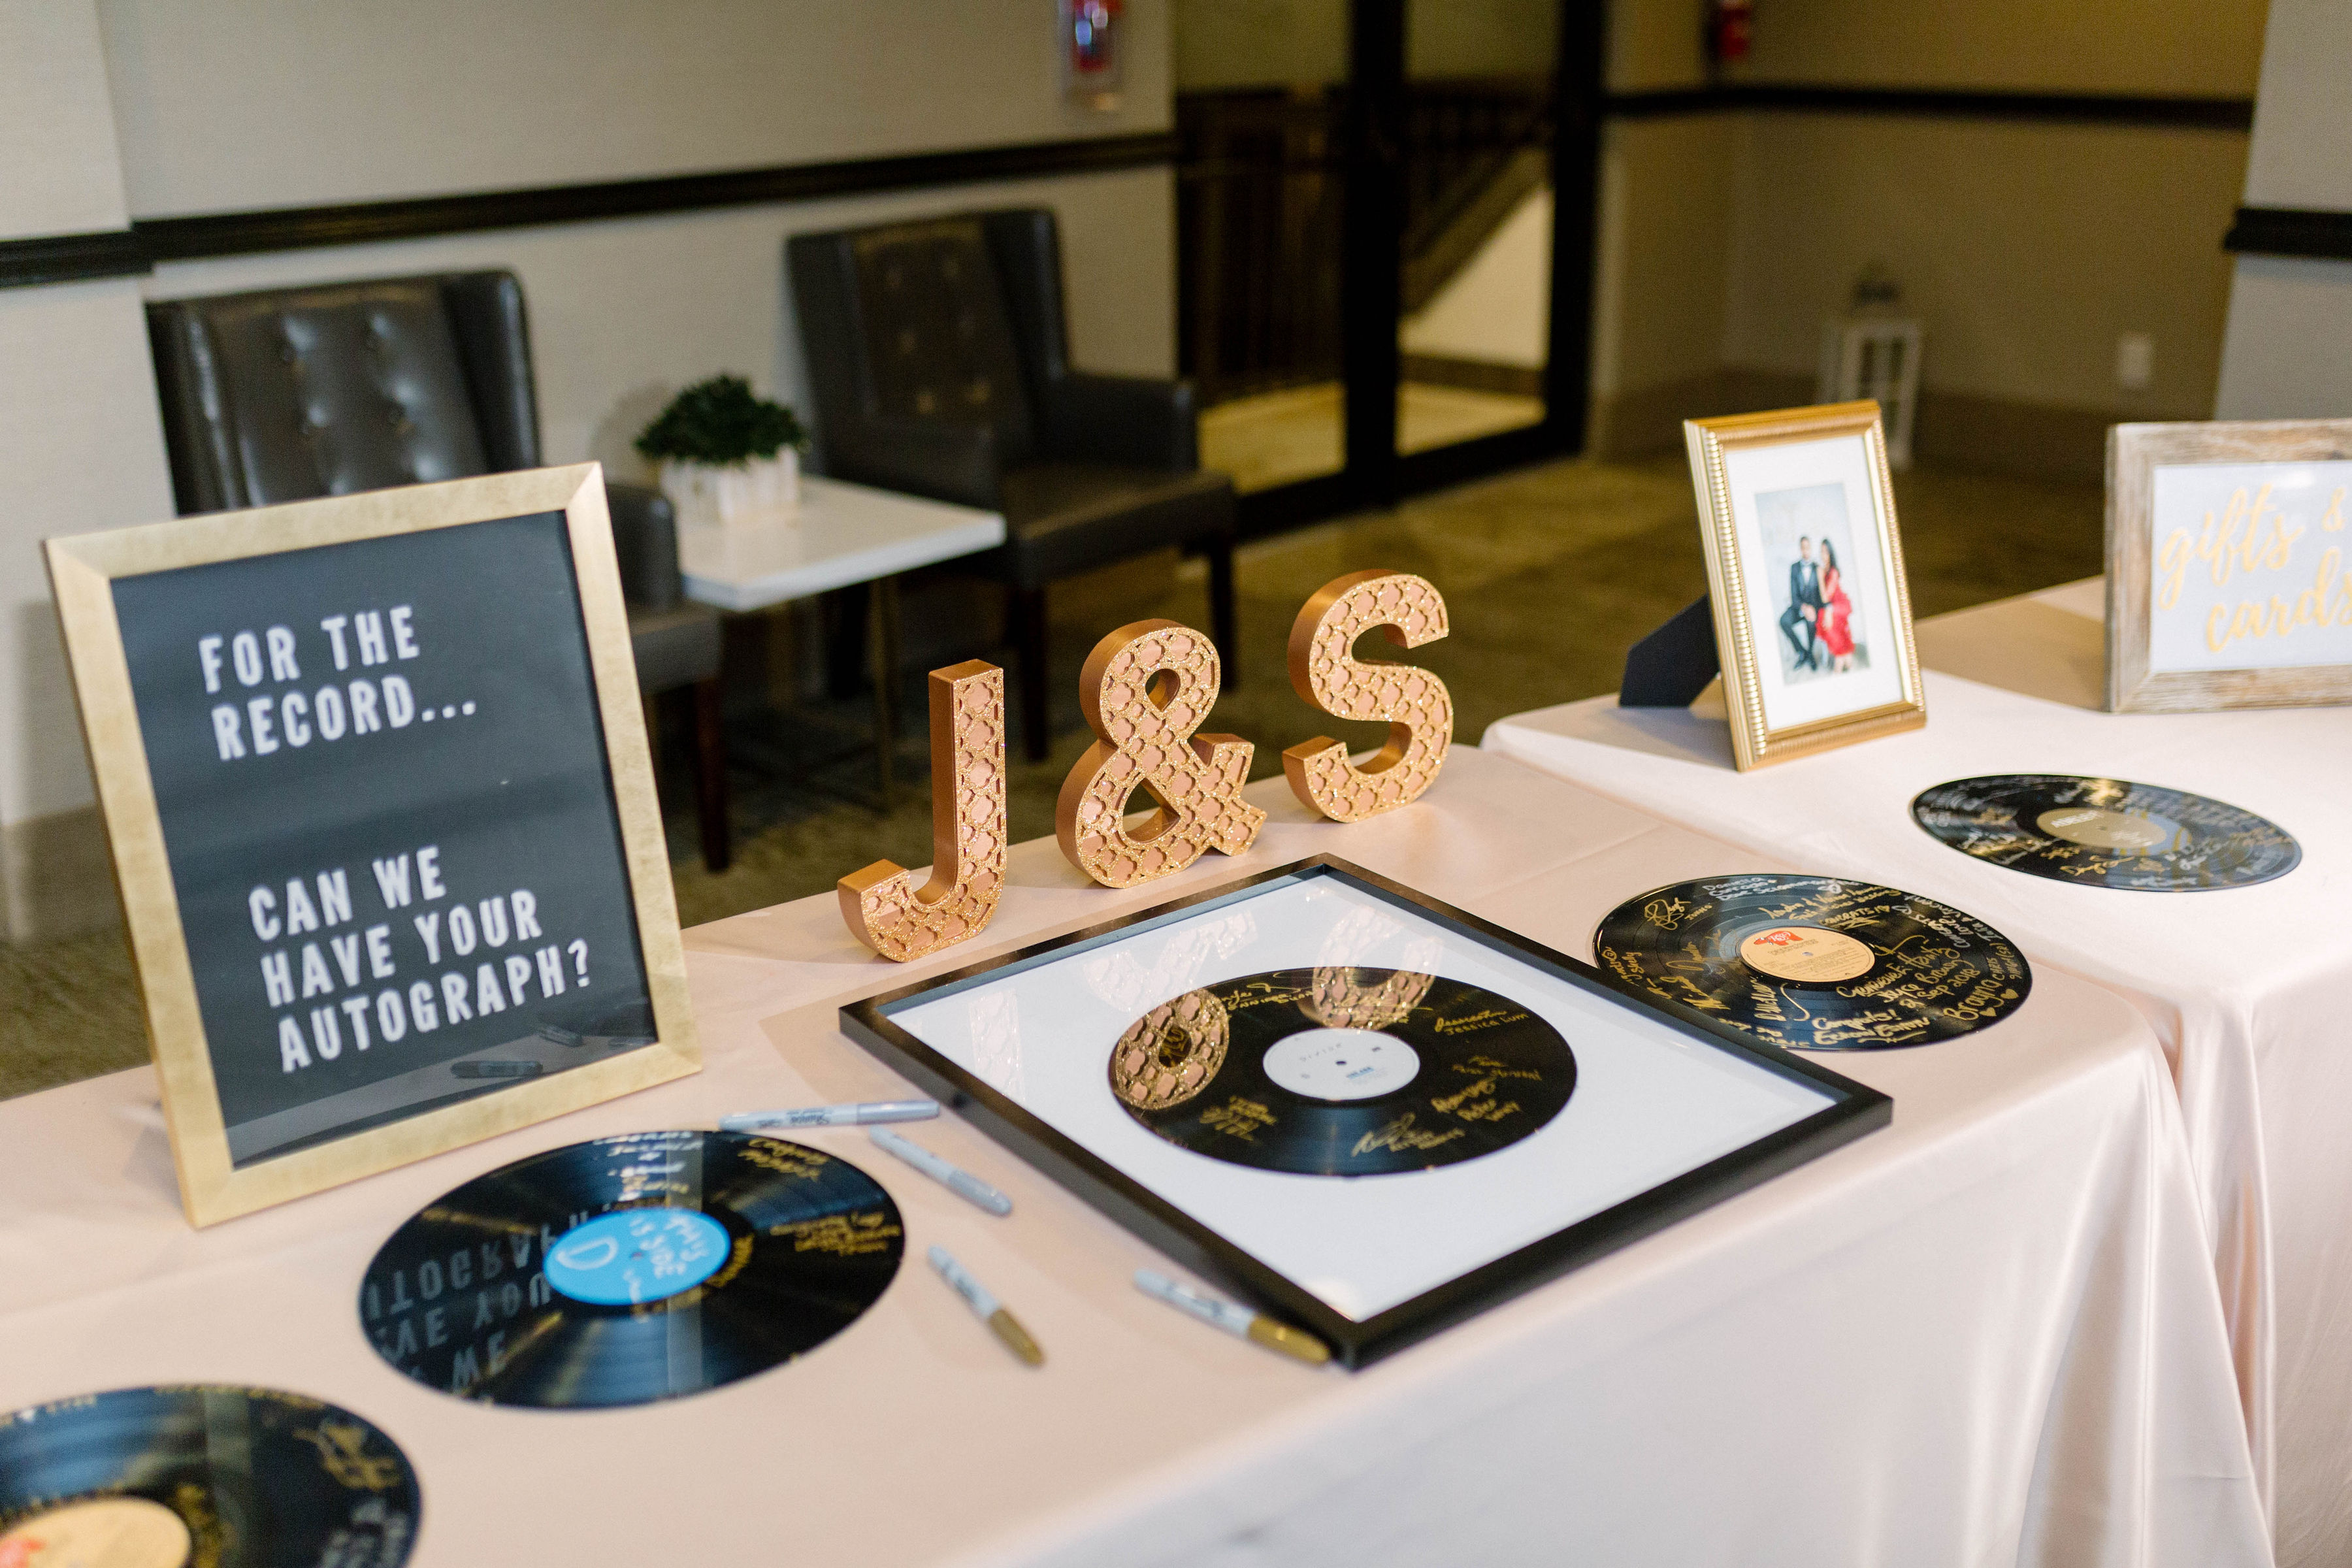 Signed vinyl records guest book idea for wedding reception